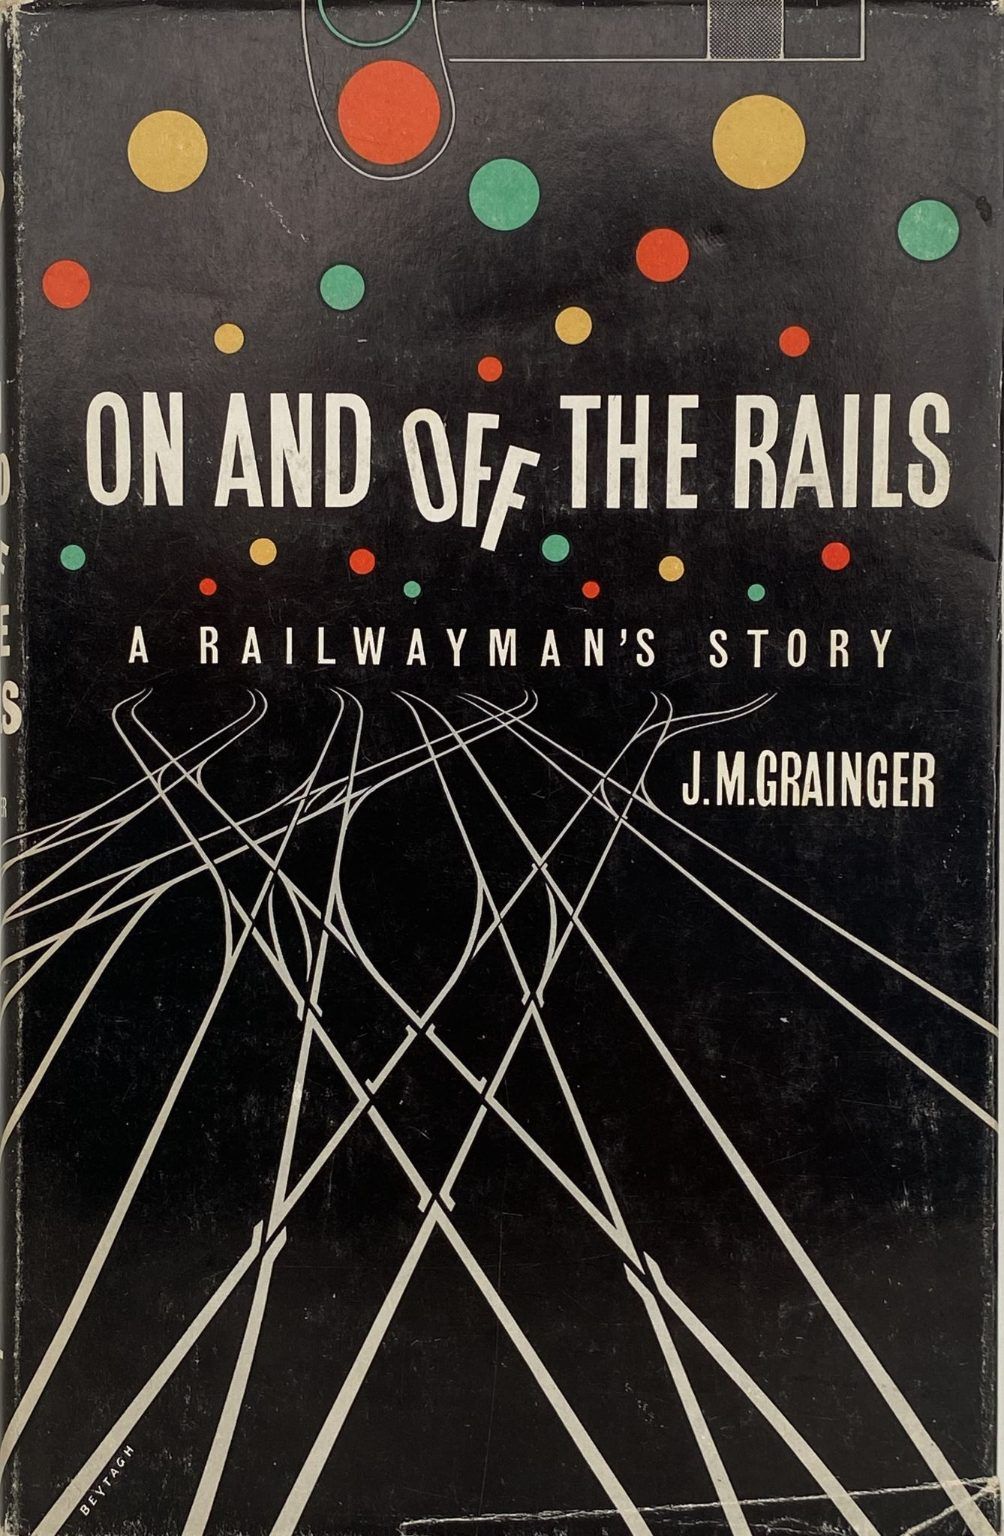 ON AND OFF THE RAILS: A Railwayman's Story